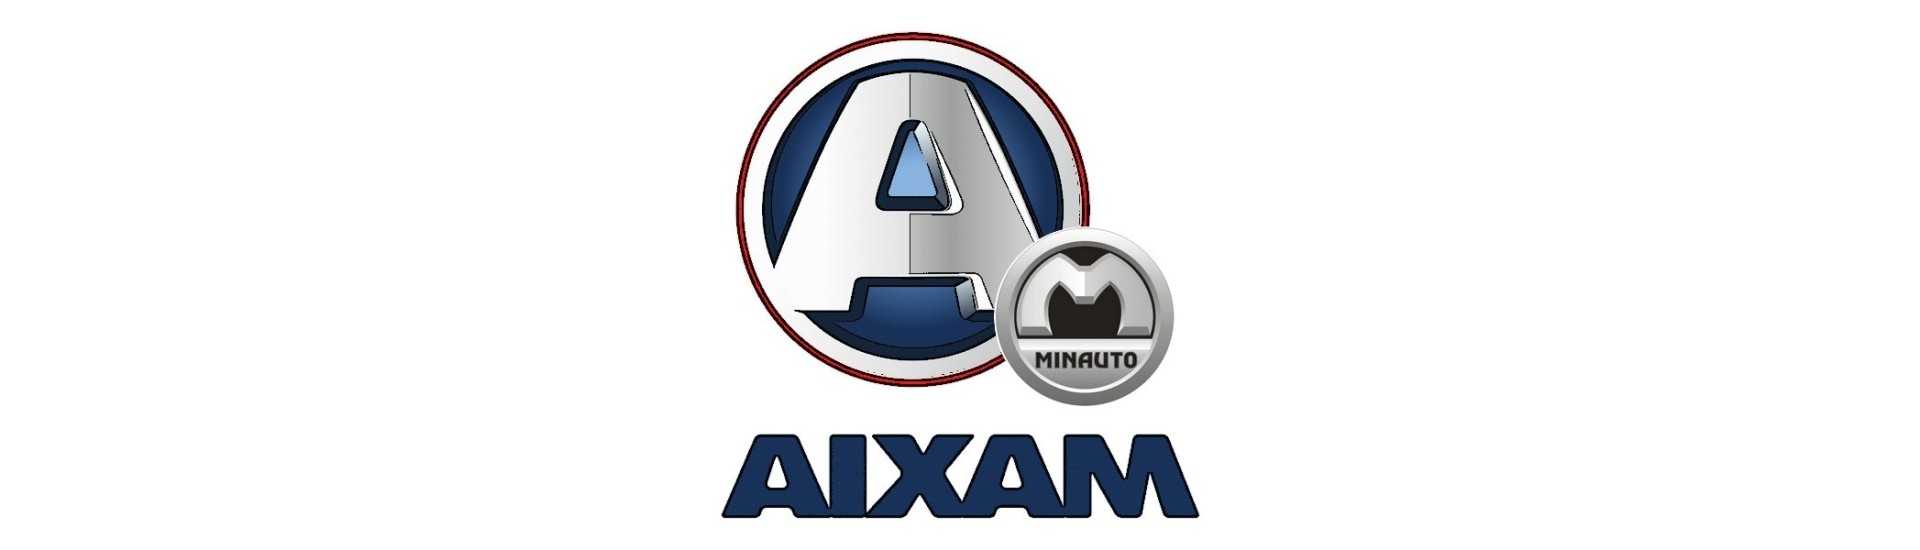 Speed lever at best price car without a permit Aixam Minauto